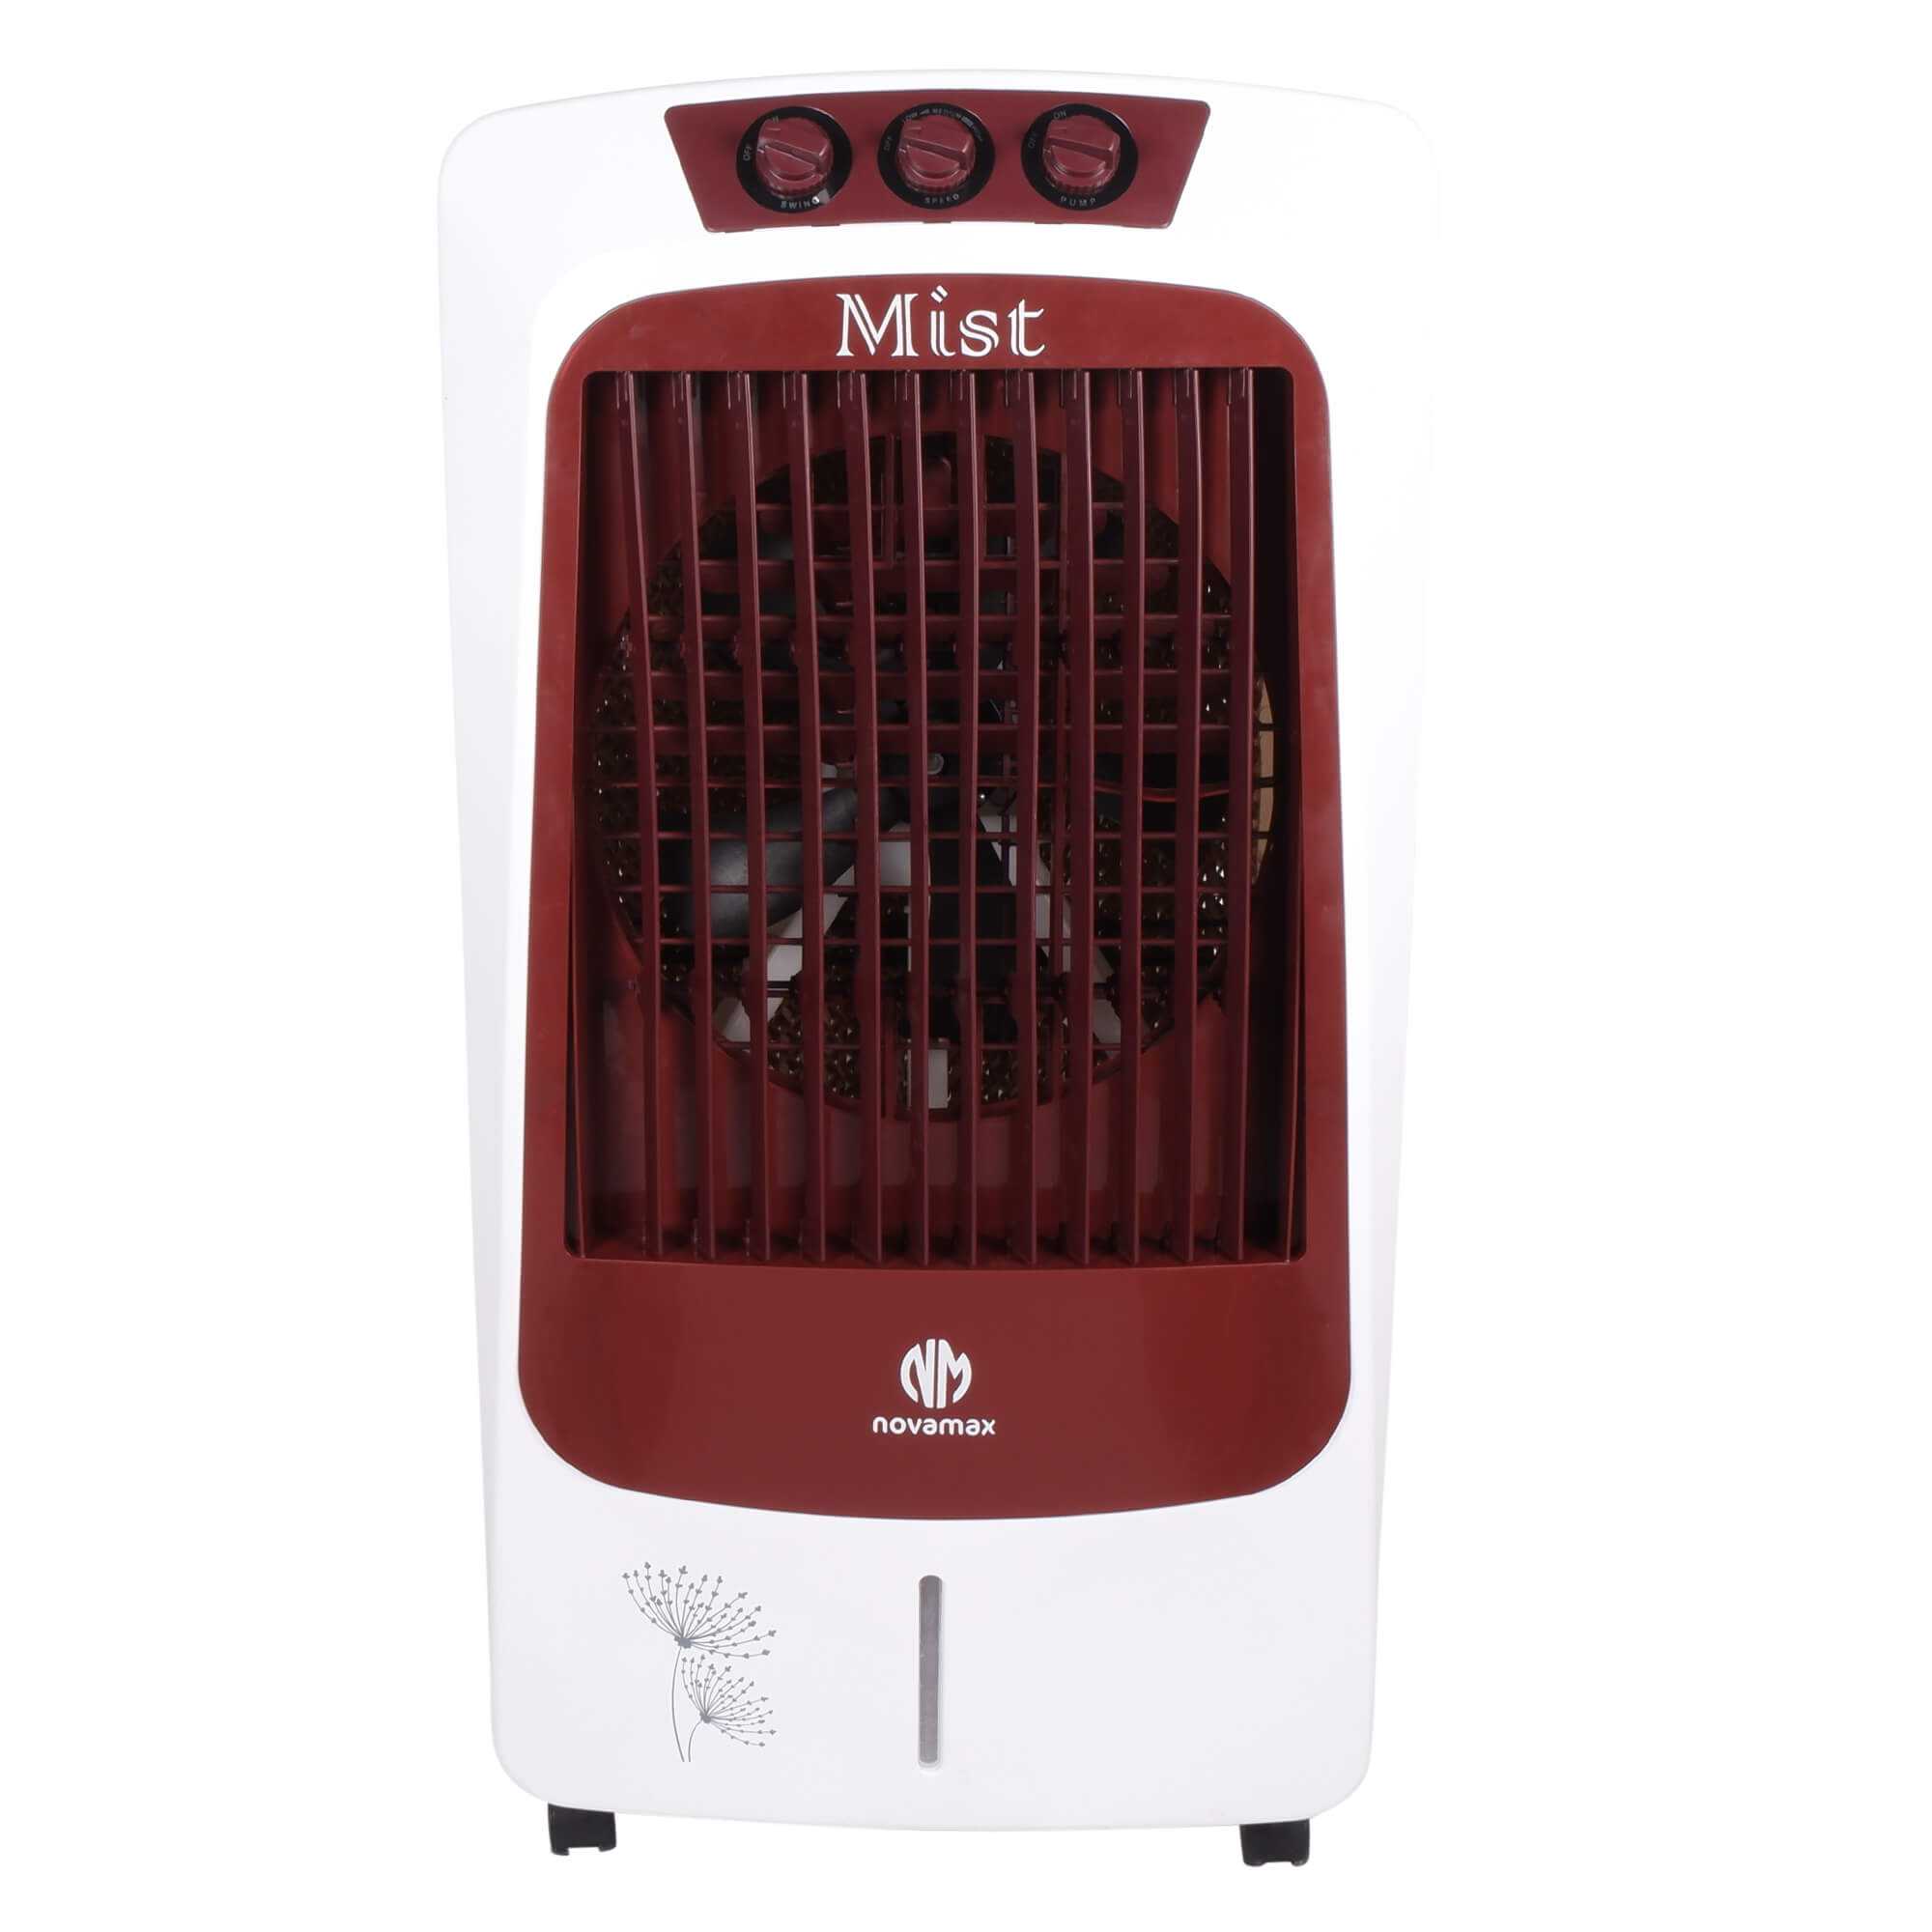 Novamax Mist 75 L Desert Air Cooler With High Density Honeycomb Cooling Pads, Auto Swing Technology, Powerful Air Throw, With Low Power Consumption (Burgundy)